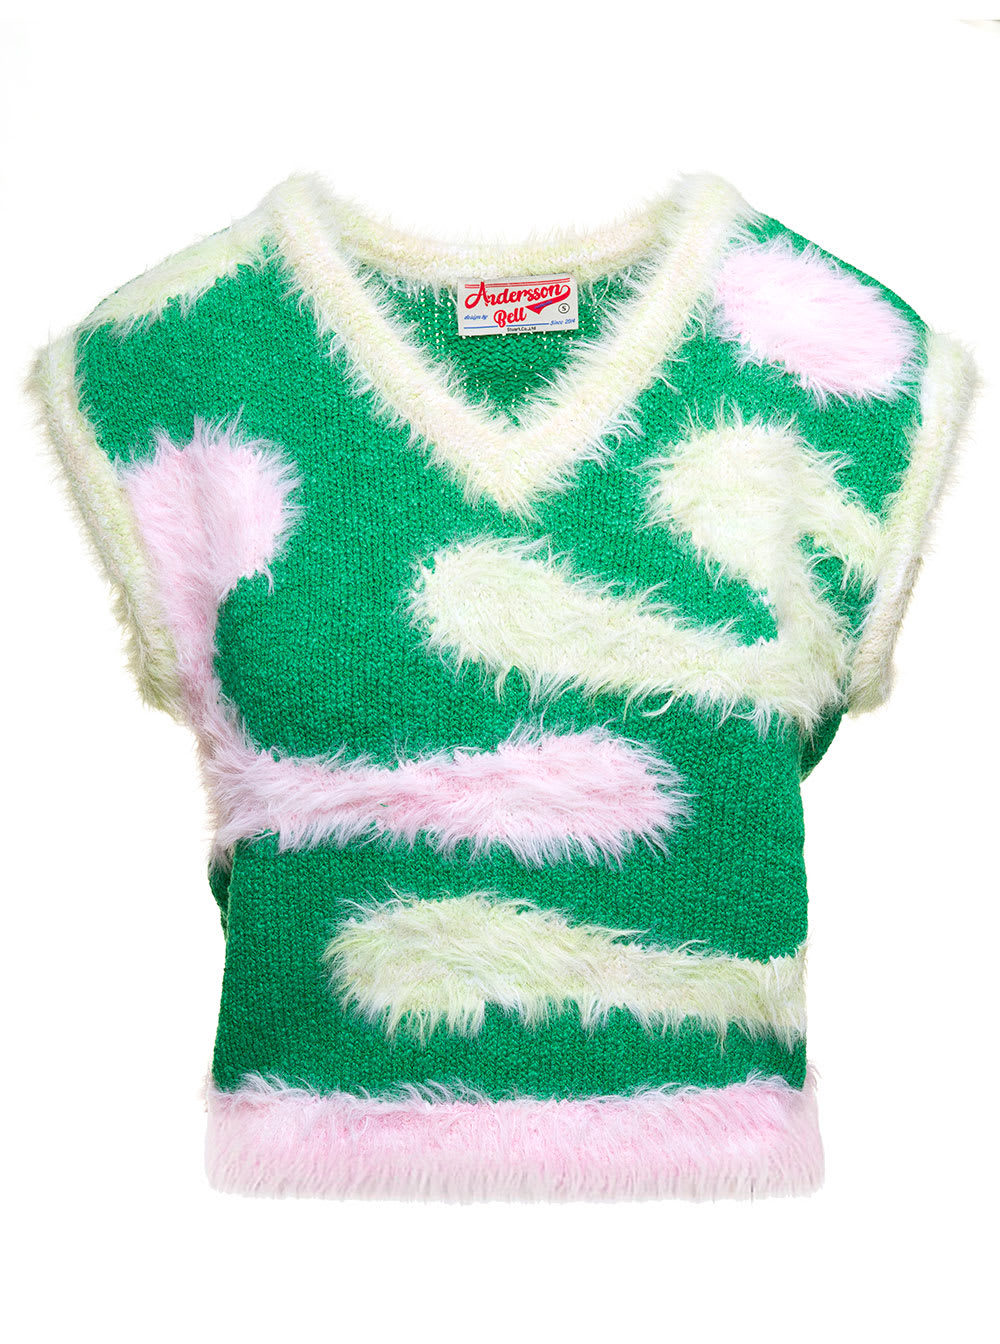 ANDERSSON BELL GREEN HAIRY VEST TOP WITH GRAPHIC MOTIF IN COTTON BLEND WOMAN